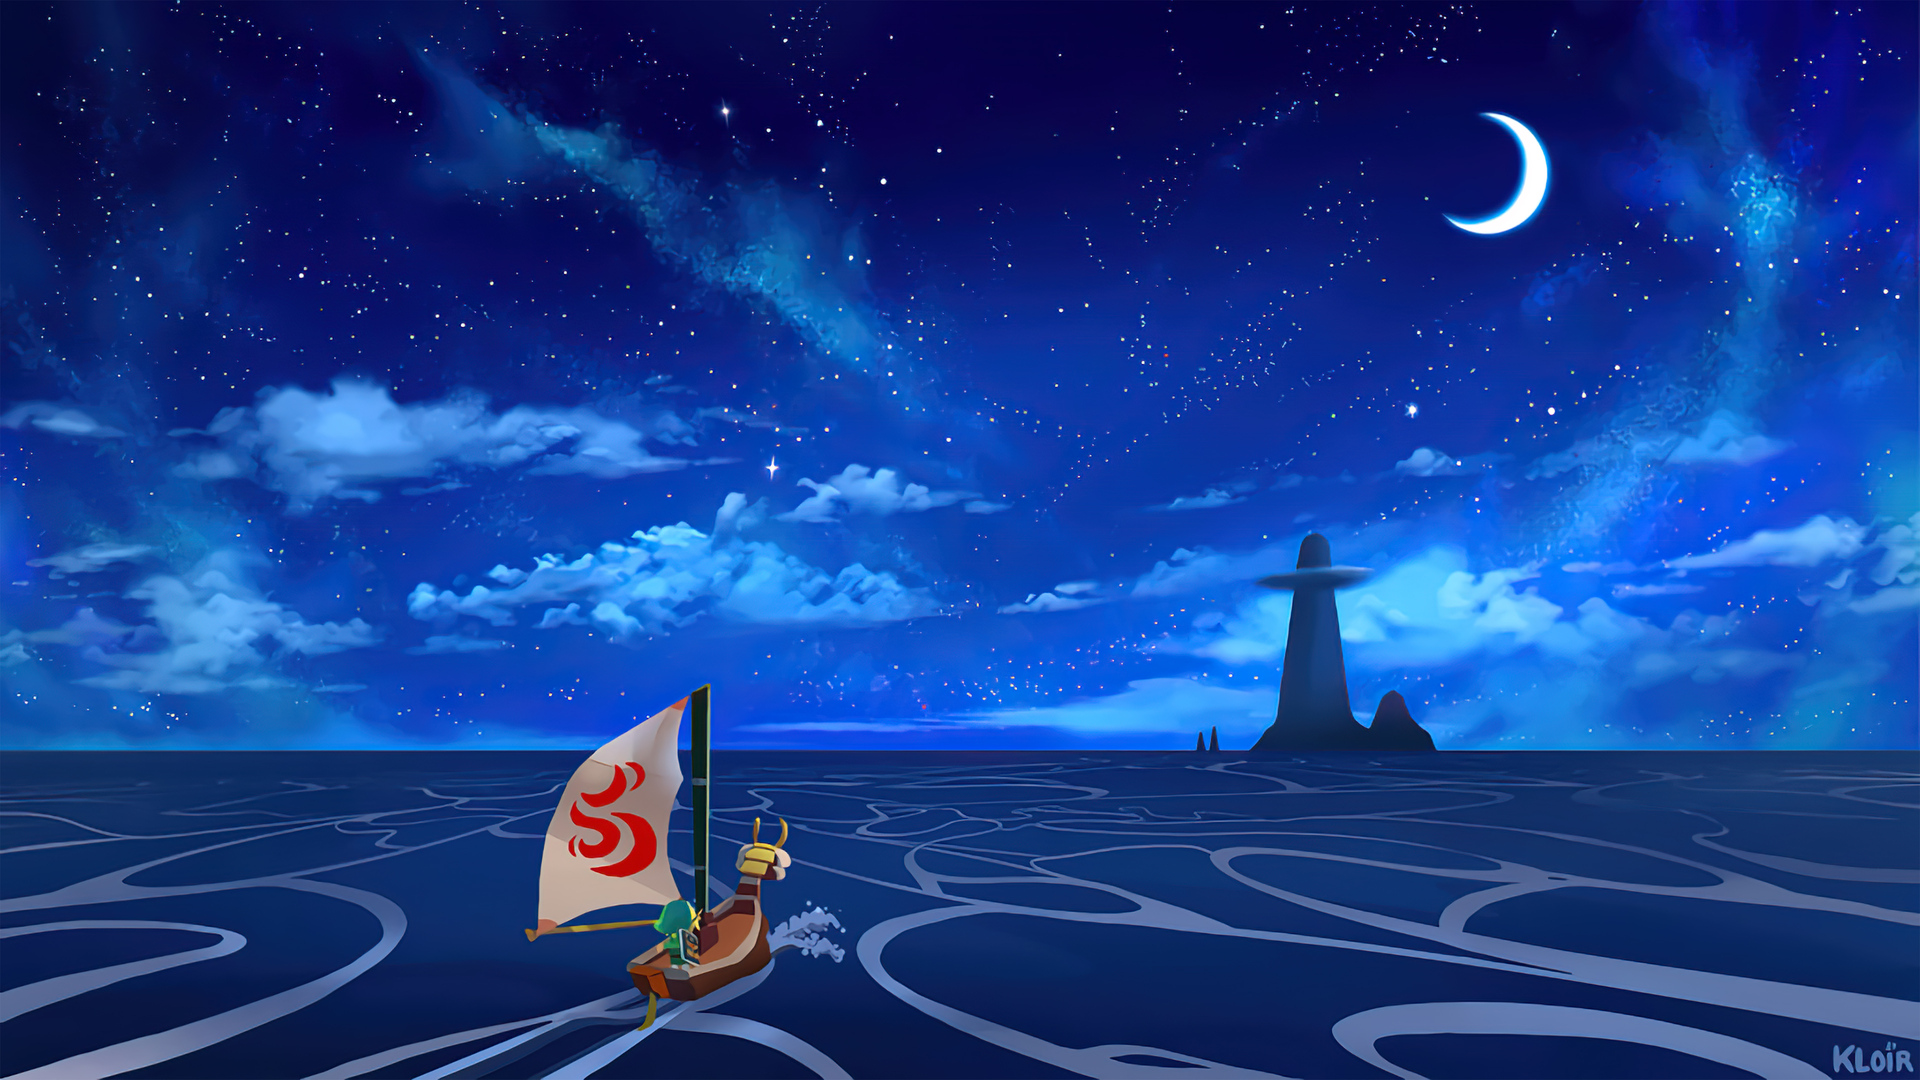 General 1920x1080 The Legend of Zelda The Legend of Zelda: The Wind Waker ocean view night island stars Link sailing King of Red Lions video games